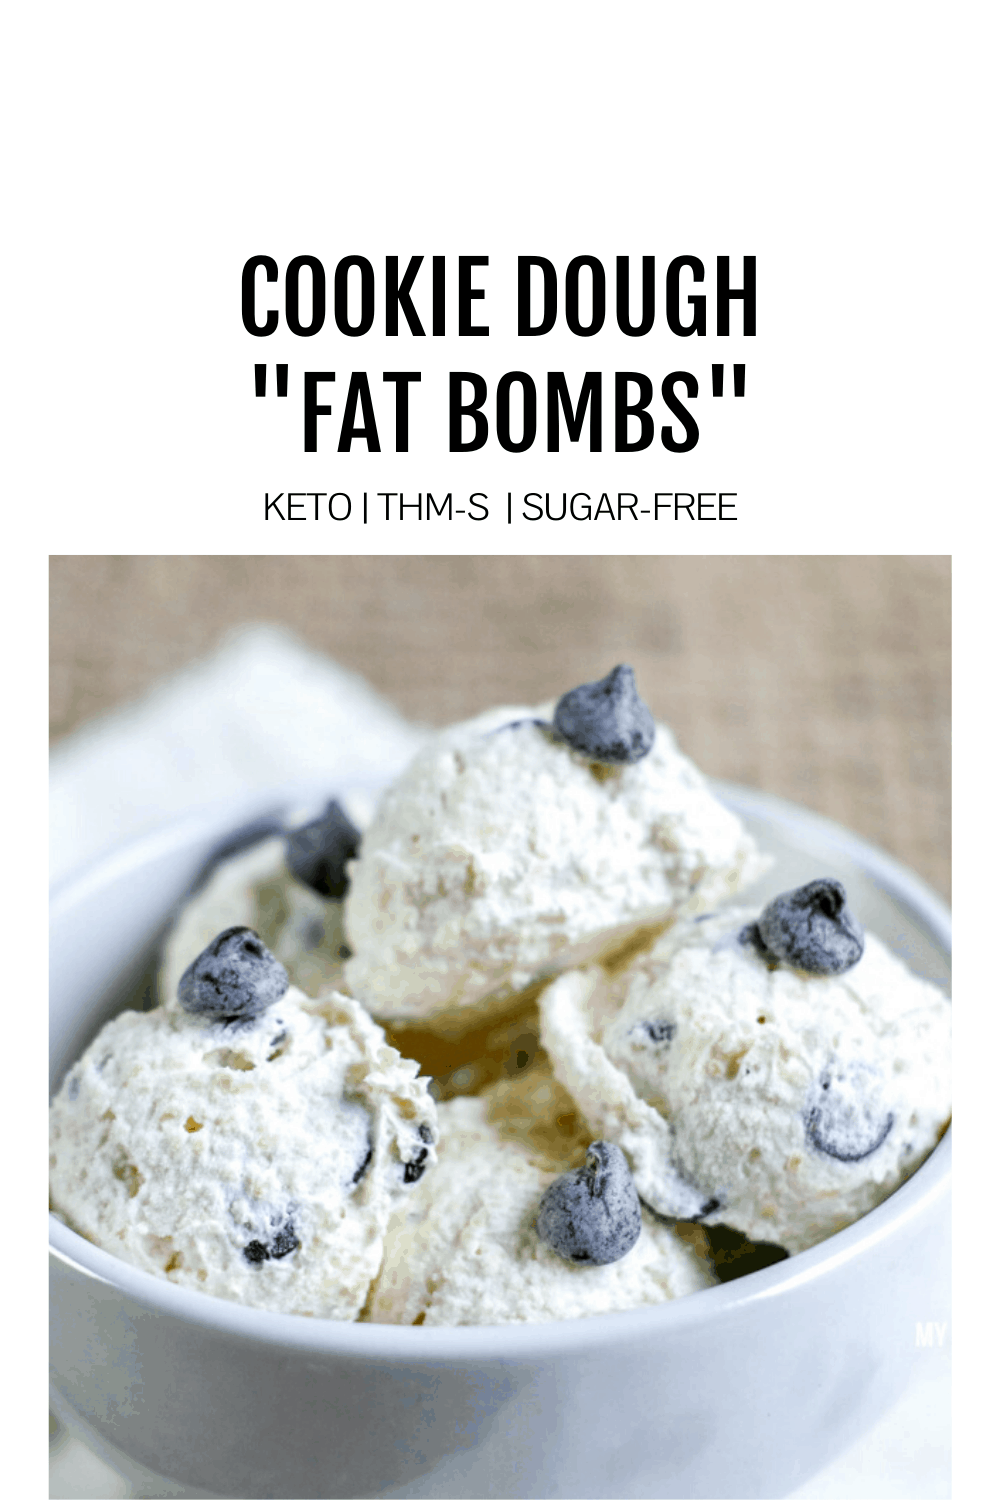 Featured Image for Cookie Dough Fat Bombs